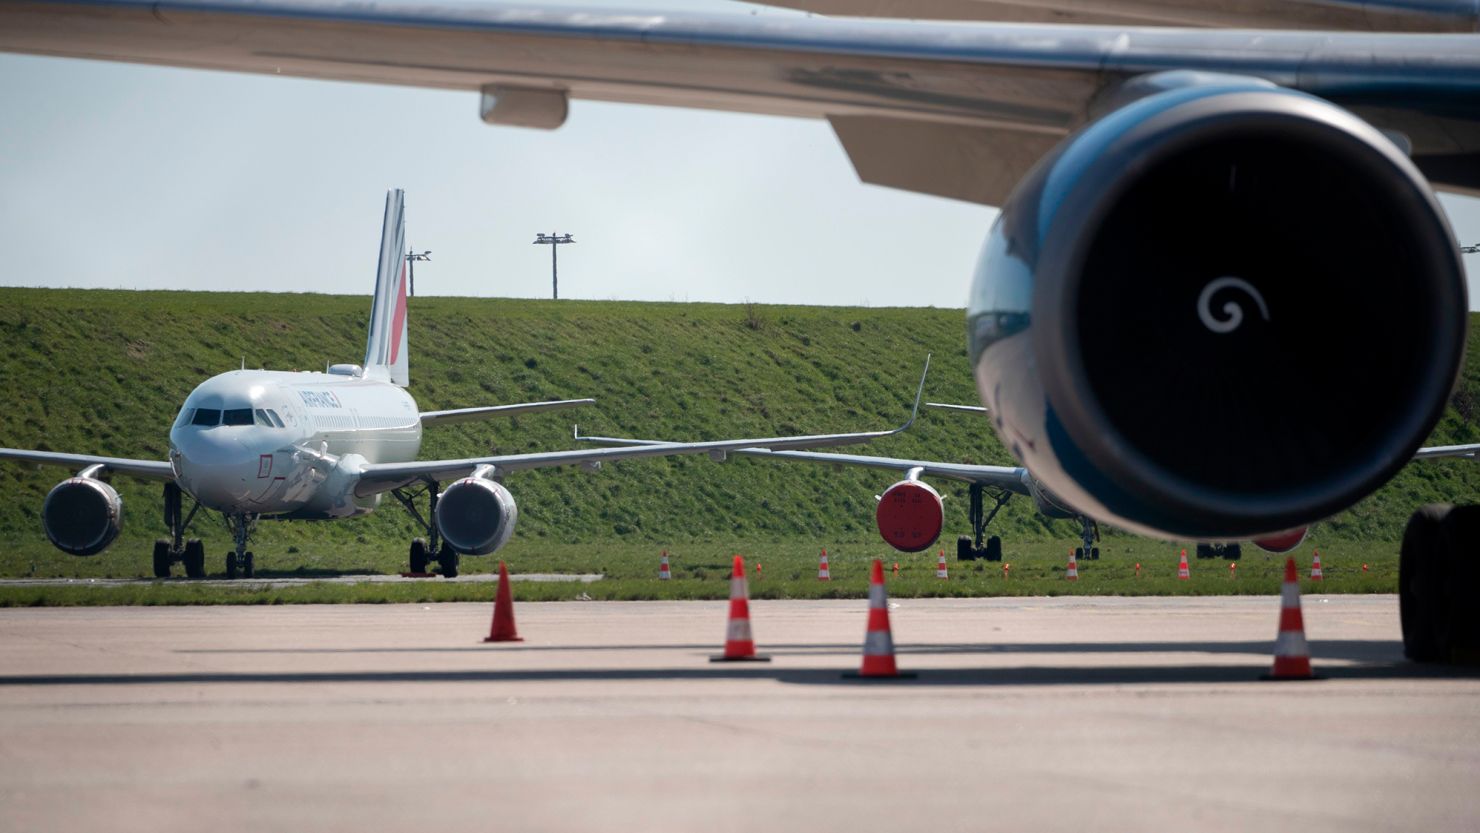 A picture taken on March 24, 2020 shows grounded airplanes at Charles de Gaulle airport, north of Paris, during a lockdown aimed at curbing the spread of Covid-19 in France.